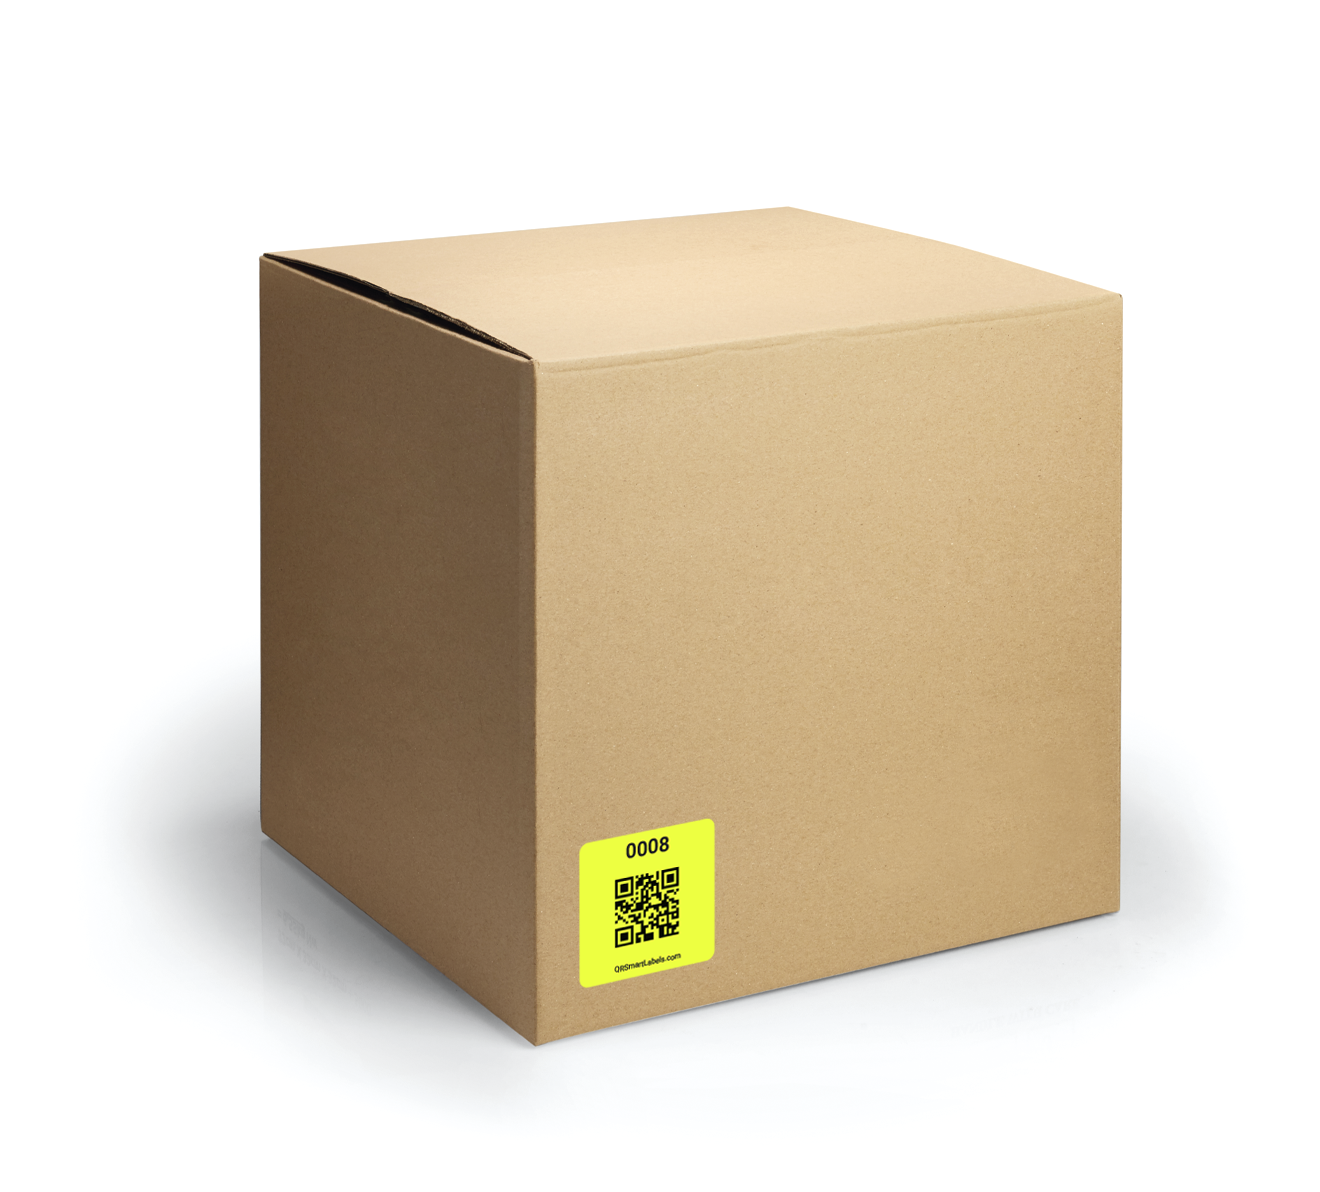 Use Smart Labels QR Code stickers to label your boxes. Use the SmartLabels app to scan the stickers so you can catalog everything that goes inside and when the time comes you can always find your stuff in storage.